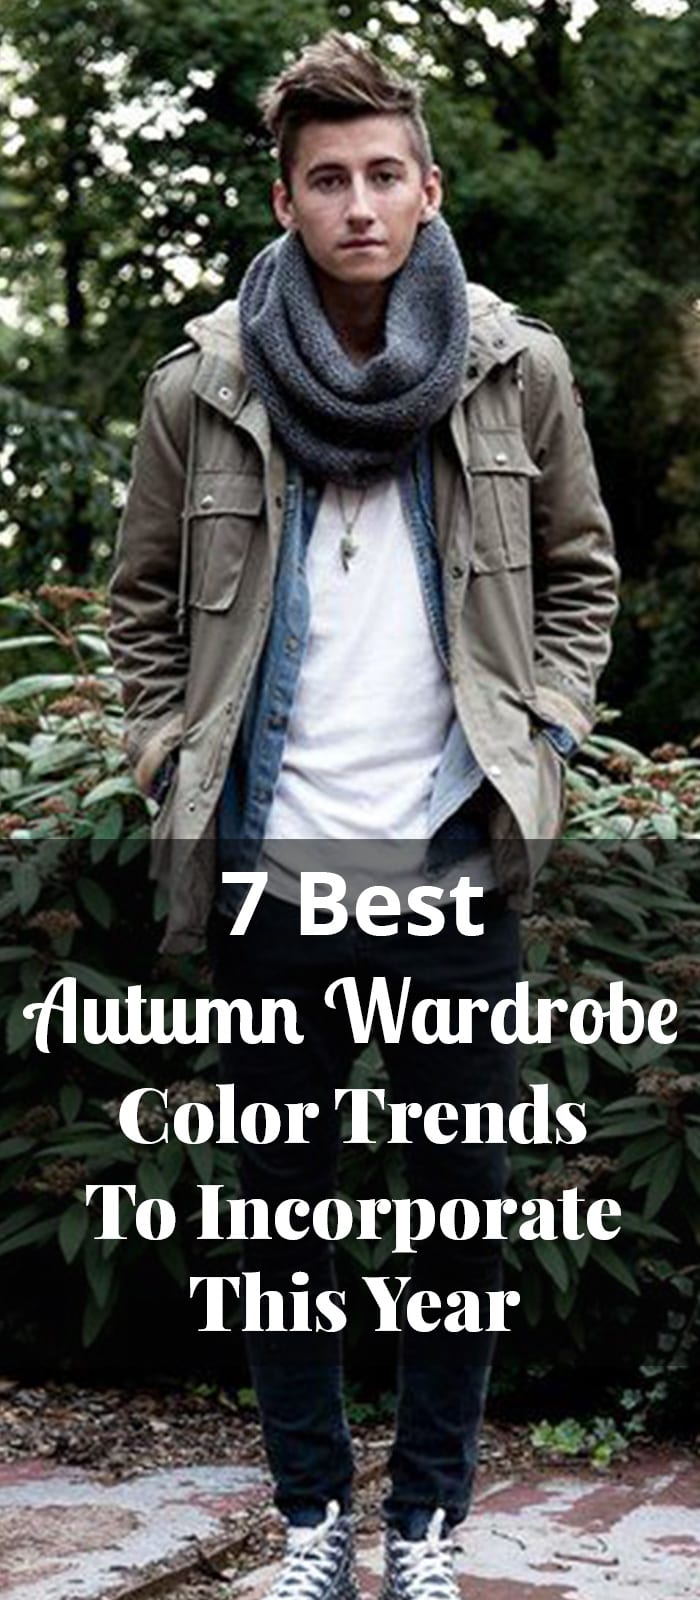 7 Best Autumn Wardrobe Color Trends To Incorporate This Year